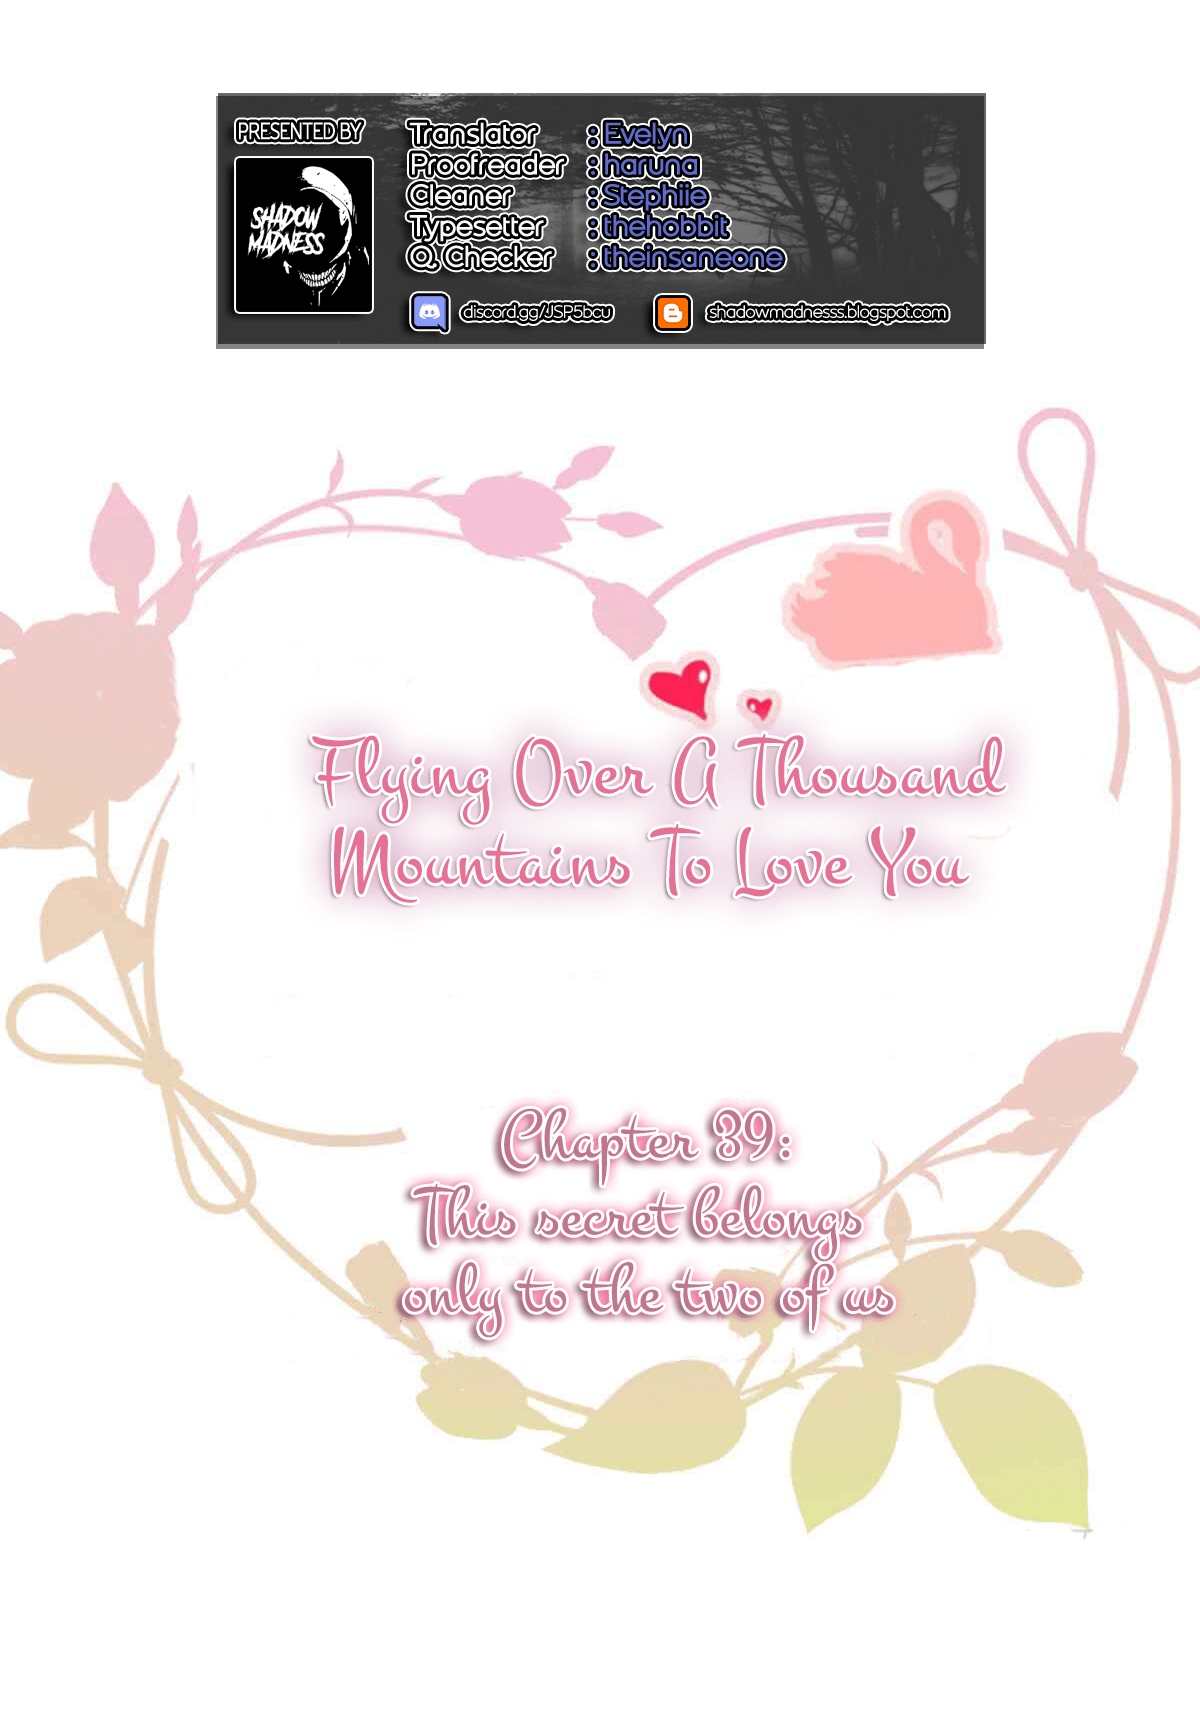 Flying Over a Thousand Mountains to Love You Ch. 39 This secret belongs only to the two of us